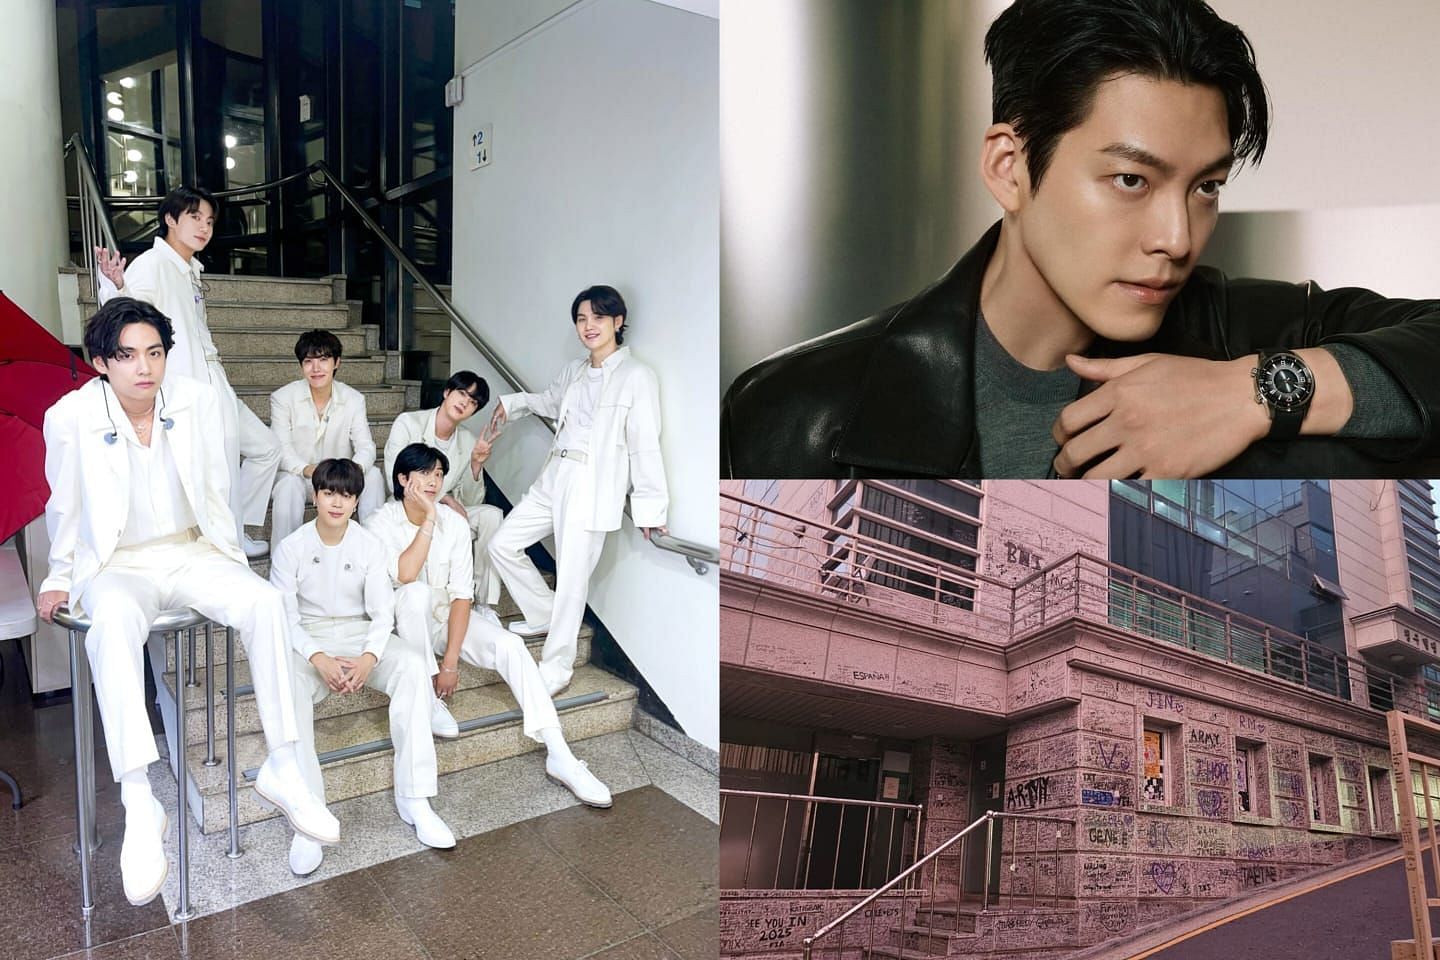 ARMYs emotional over reports of actor Kim Woo-bin purchasing the old BTS building (Image via @bts_bighit/X @___kimwoobin/Instagfram and @hobumsong/Instagram)